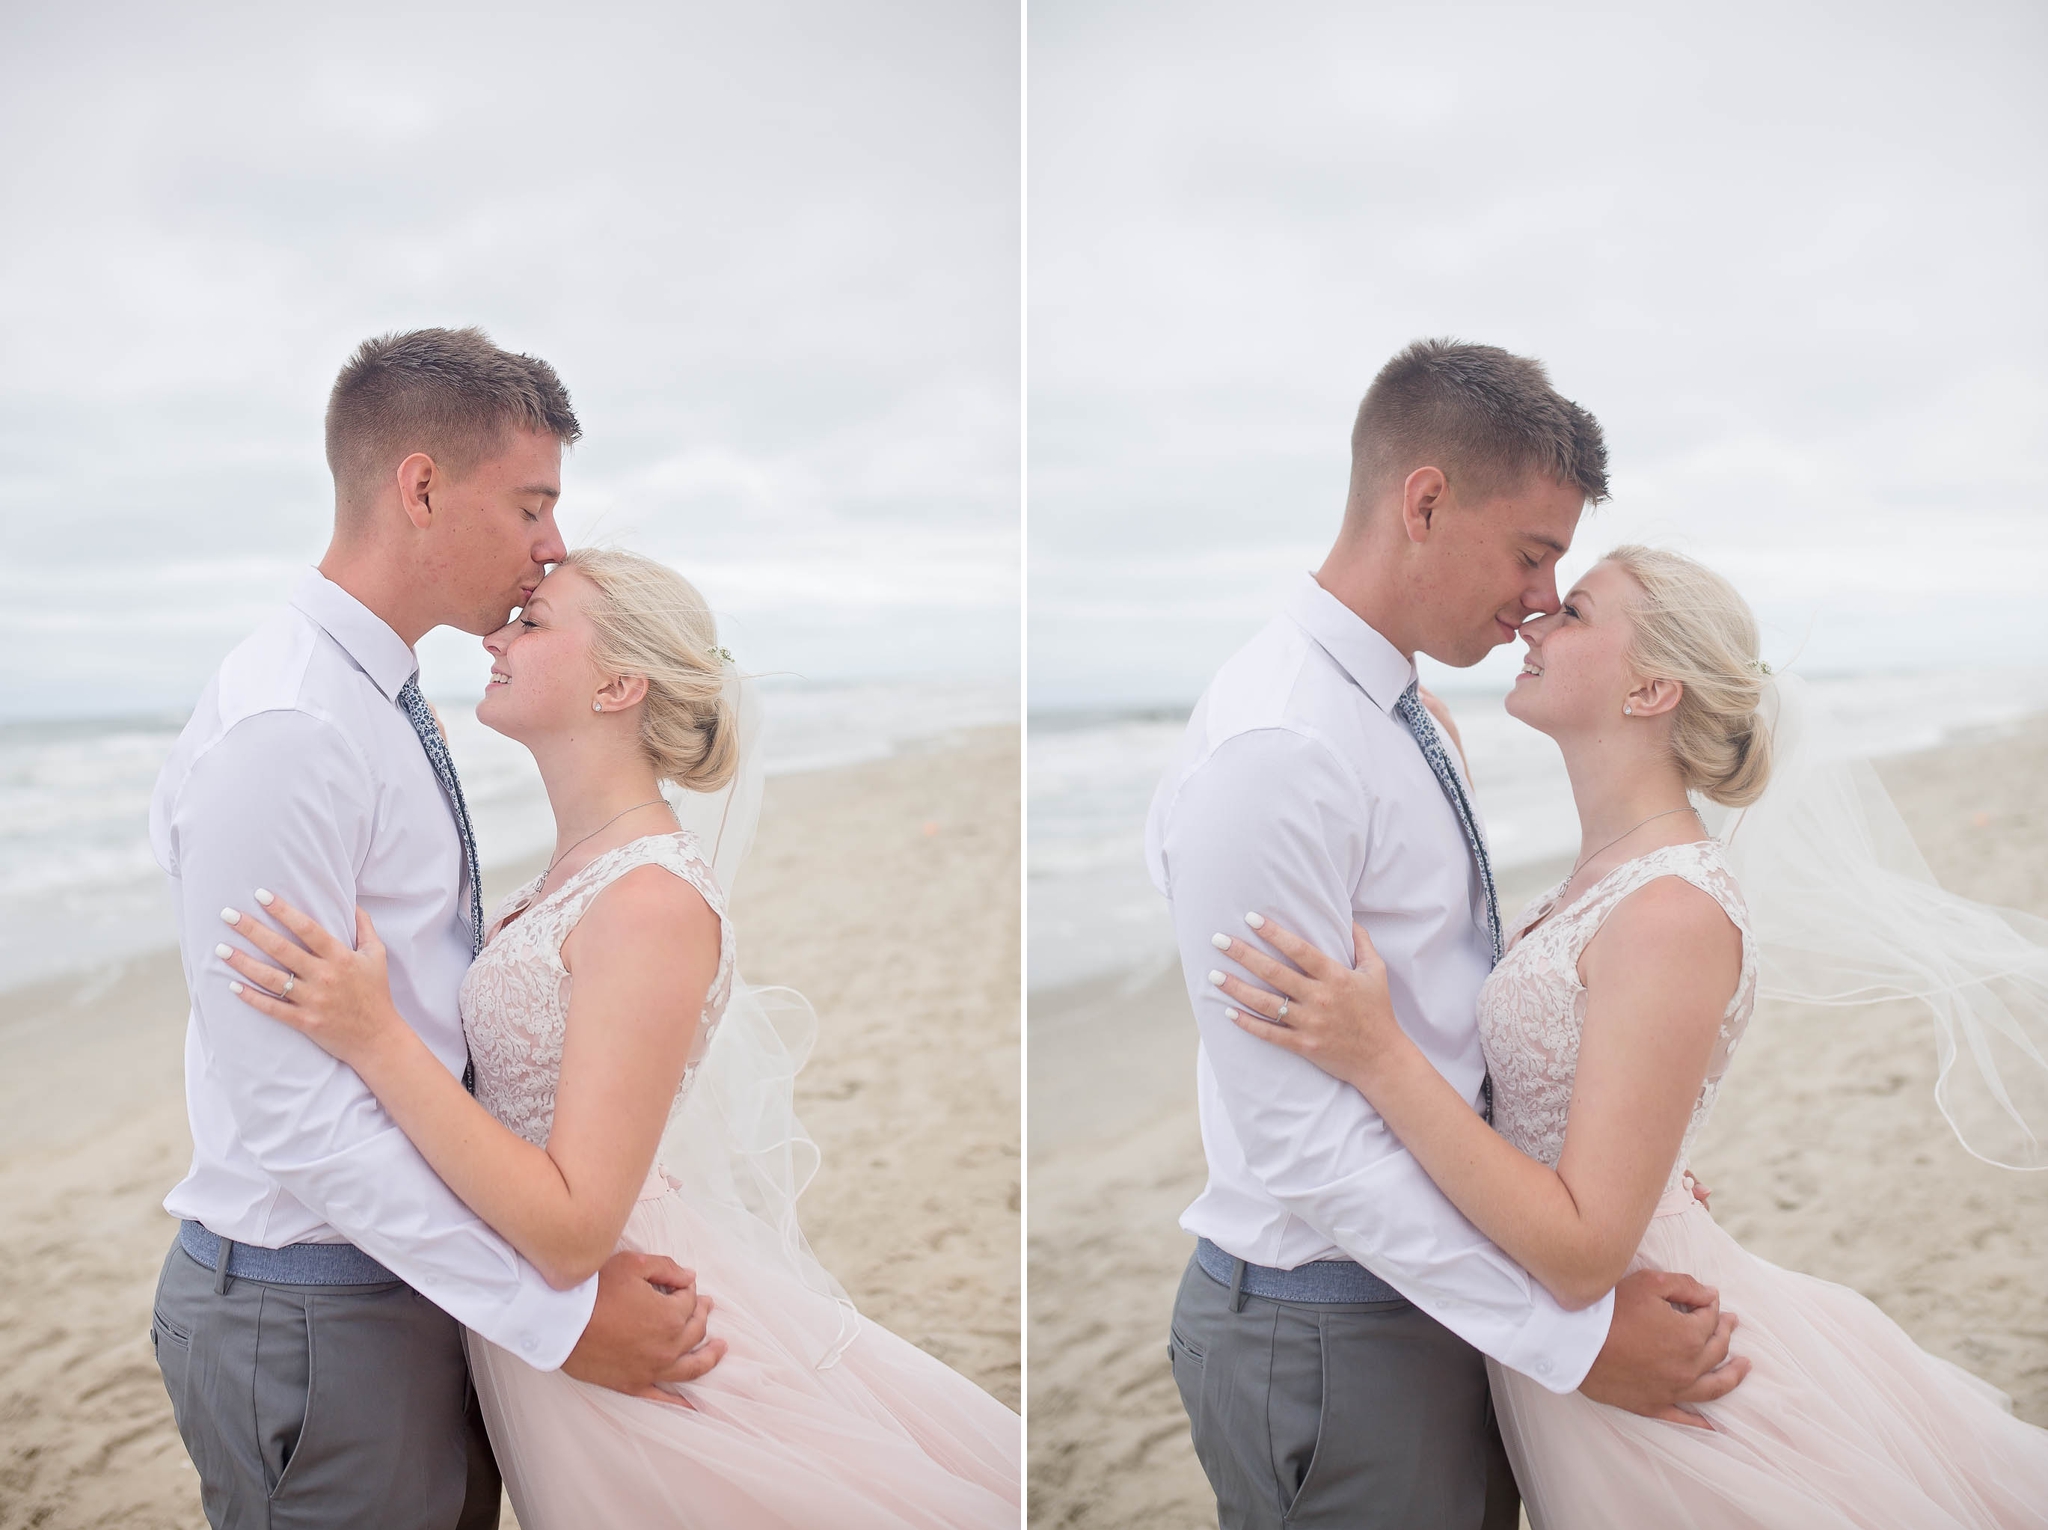 Wedding Photography at Pelicans Landing in Corolla, NC - Outer Banks North Carolina Wedding Photographer - Avery and Kirk Sanders 